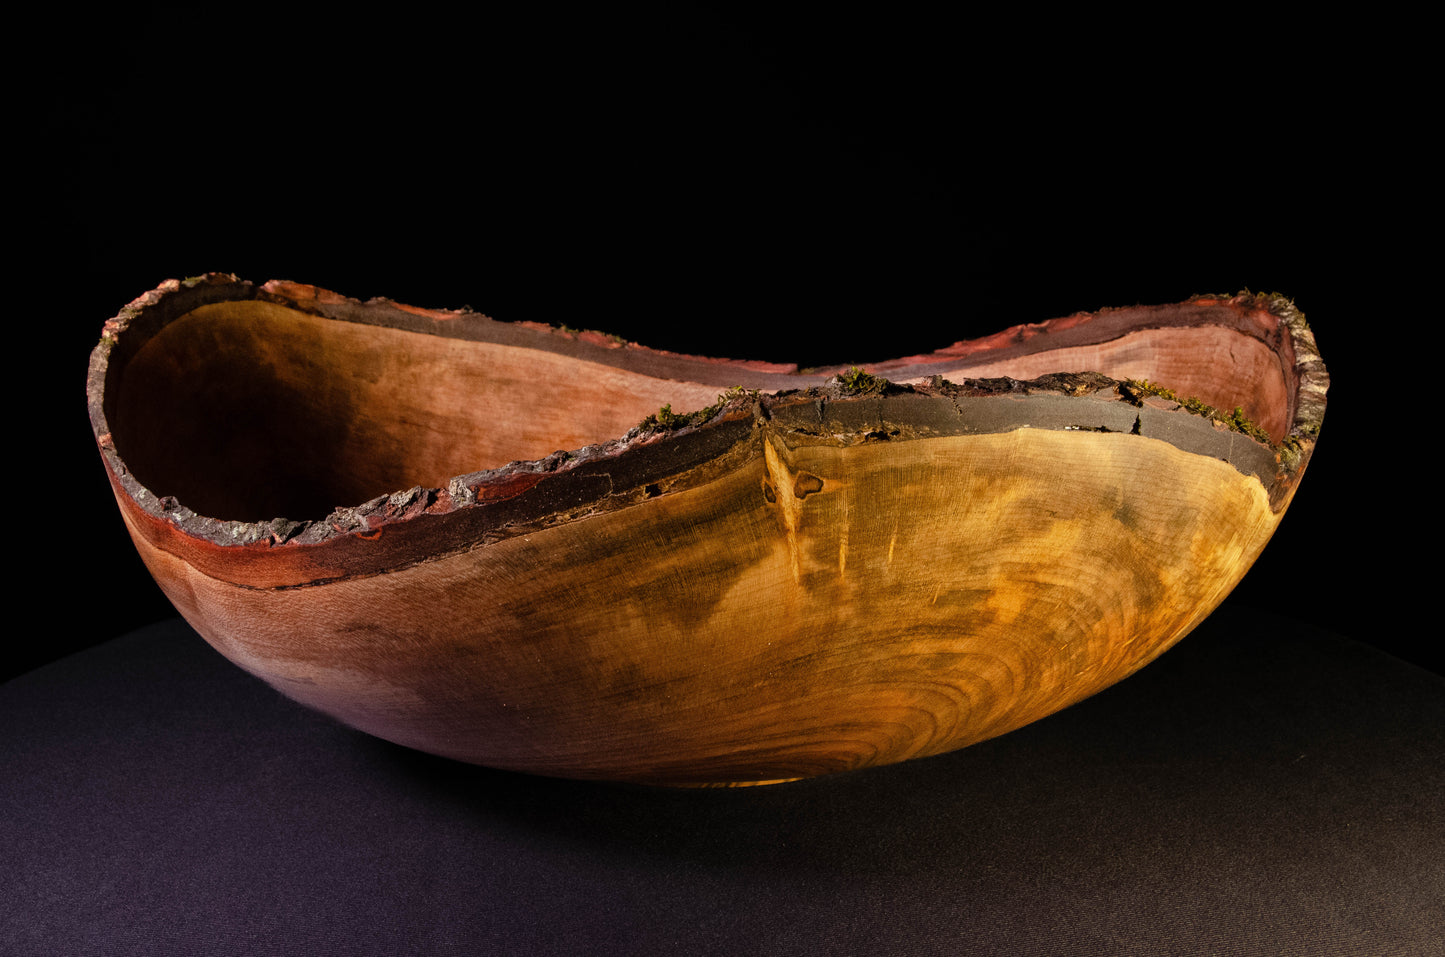 Shallow bowl with natural edge and striking crotch figure. Exquisite display, gift, or centerpiece.